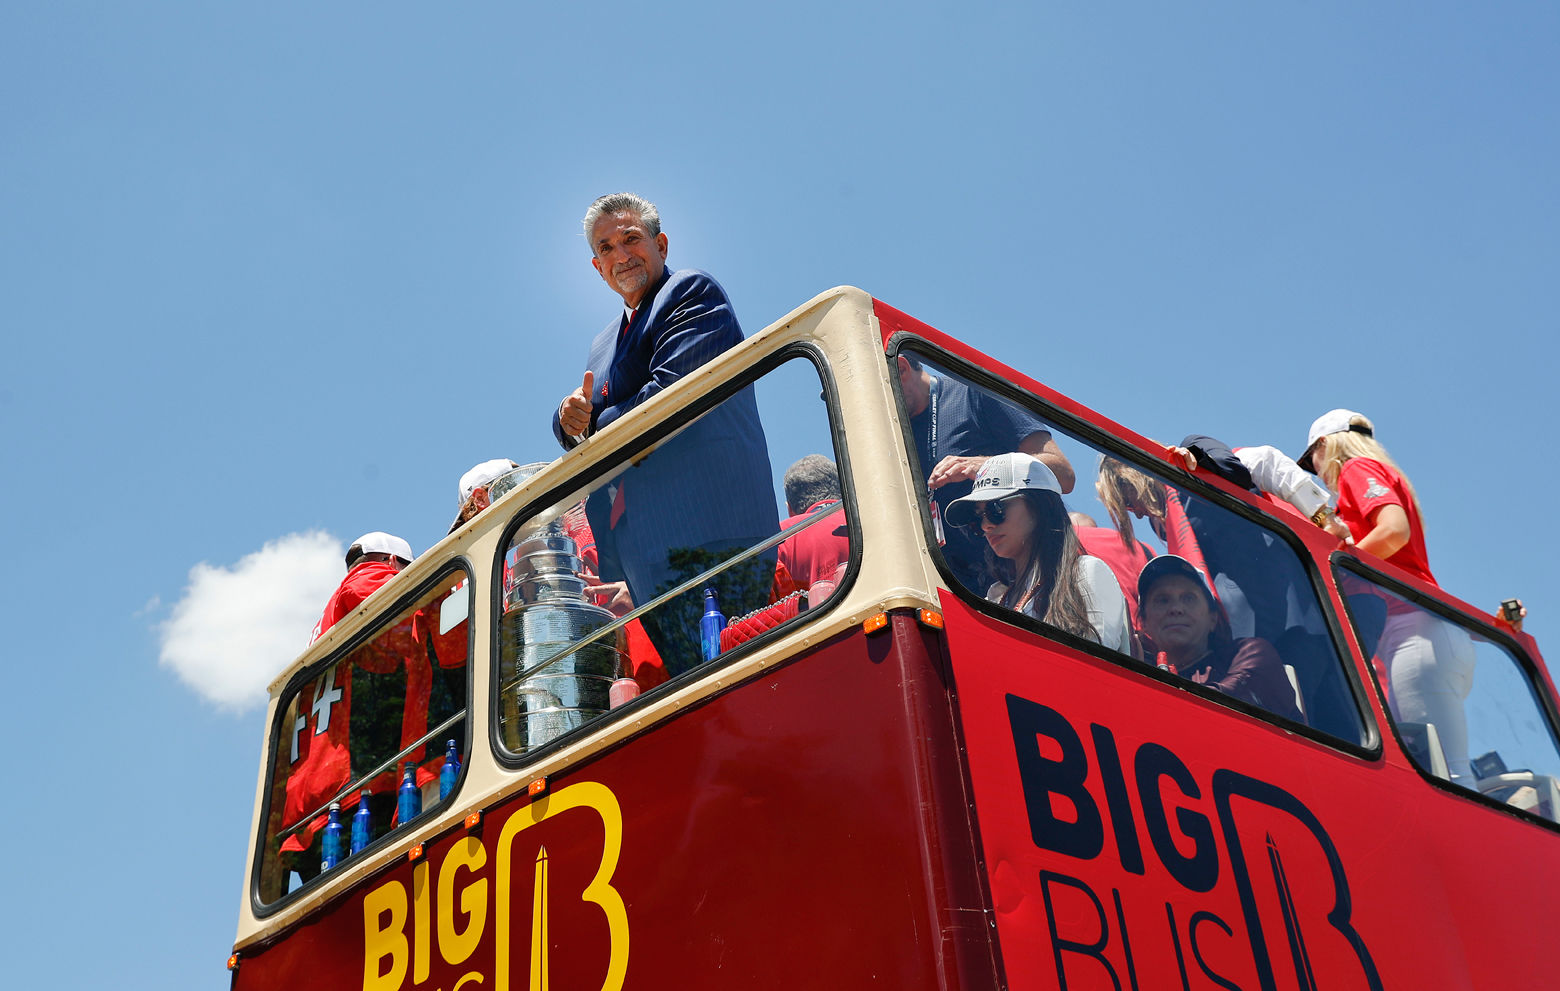 Washington Capitals owner Ted Leonsis looks down from the bus. (AP Photo/Pablo Martinez Monsivais)